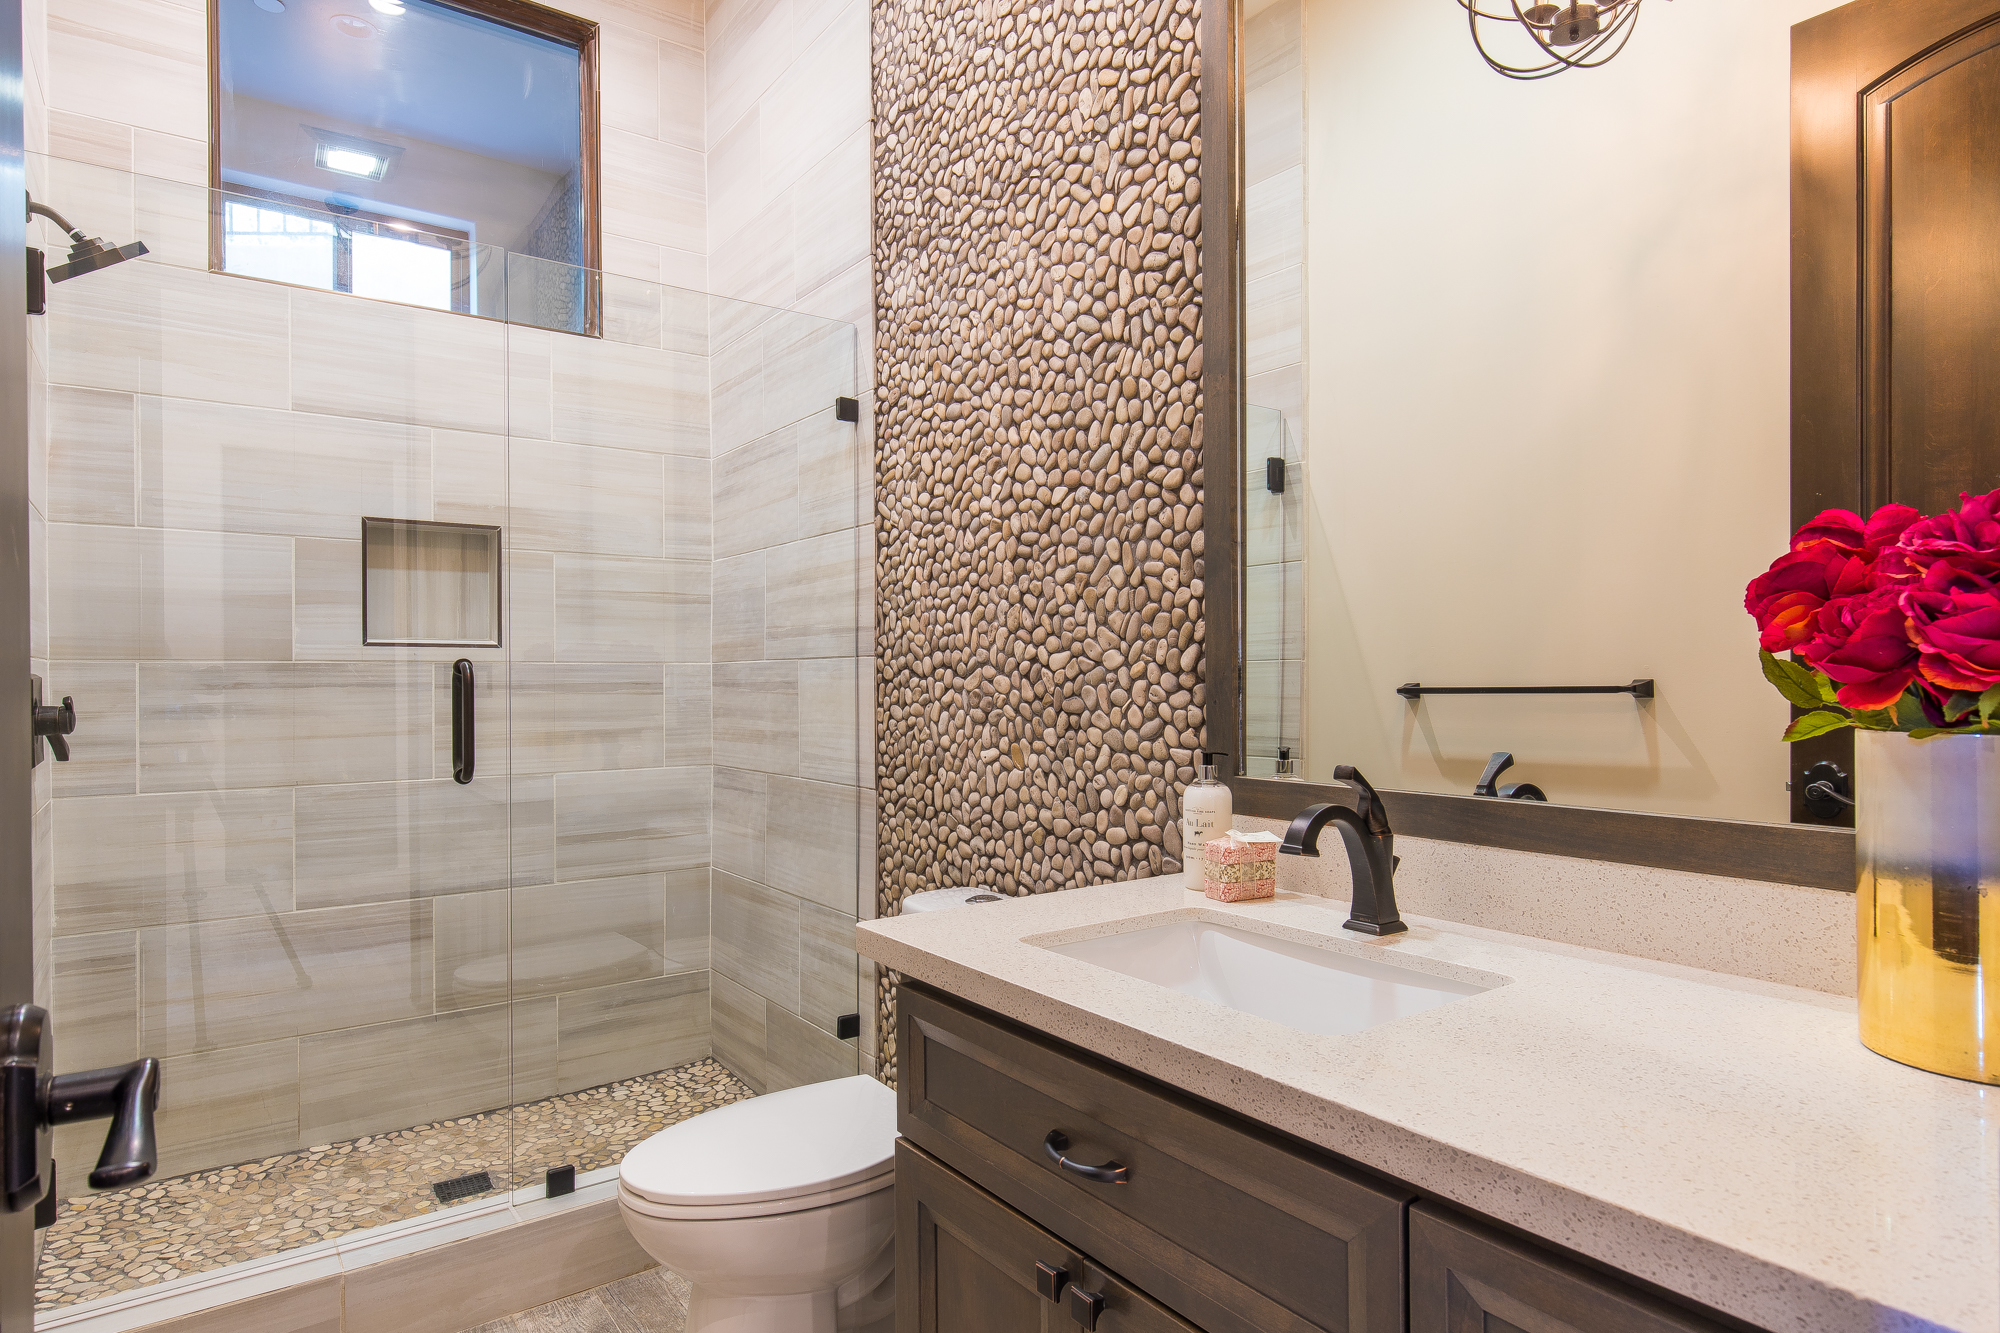  Each of the bathrooms is beautifully tiled and accentuated with Italian porcelain tile on the floors and the shower walls 